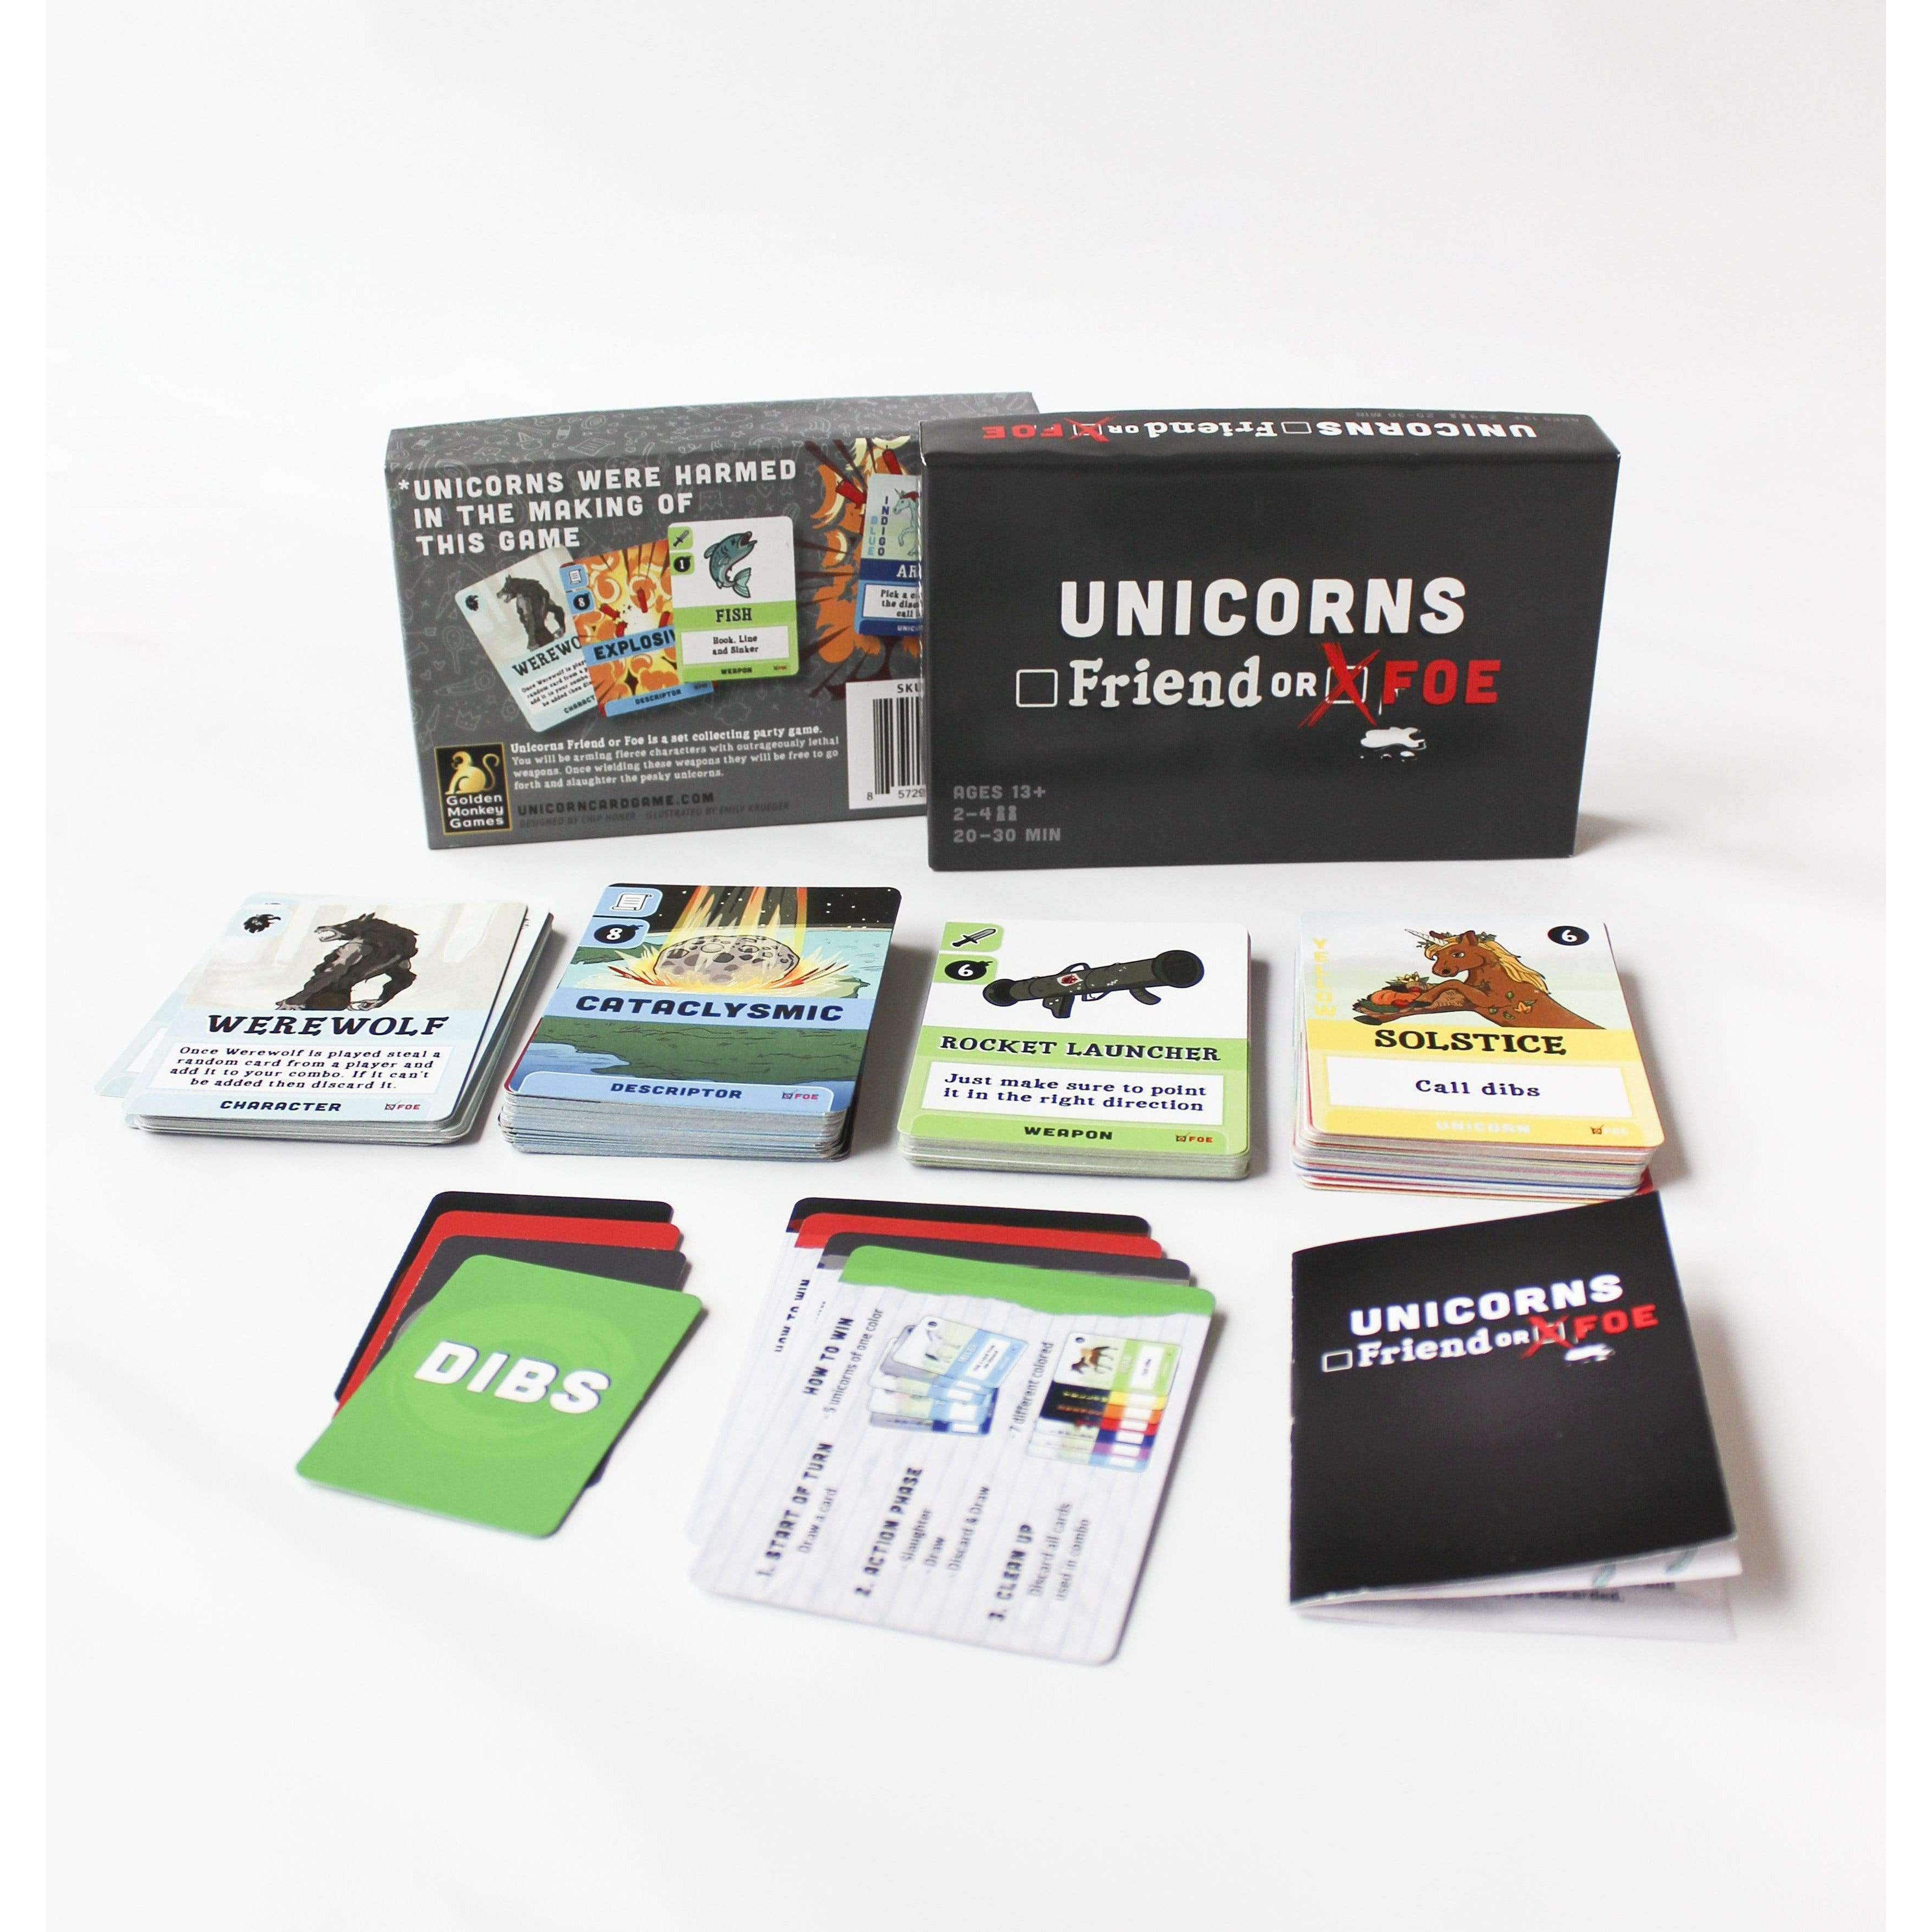 Golden Monkey Games-Unicorns Friends or Foe Party Card Game for Kids & Adults--Legacy Toys